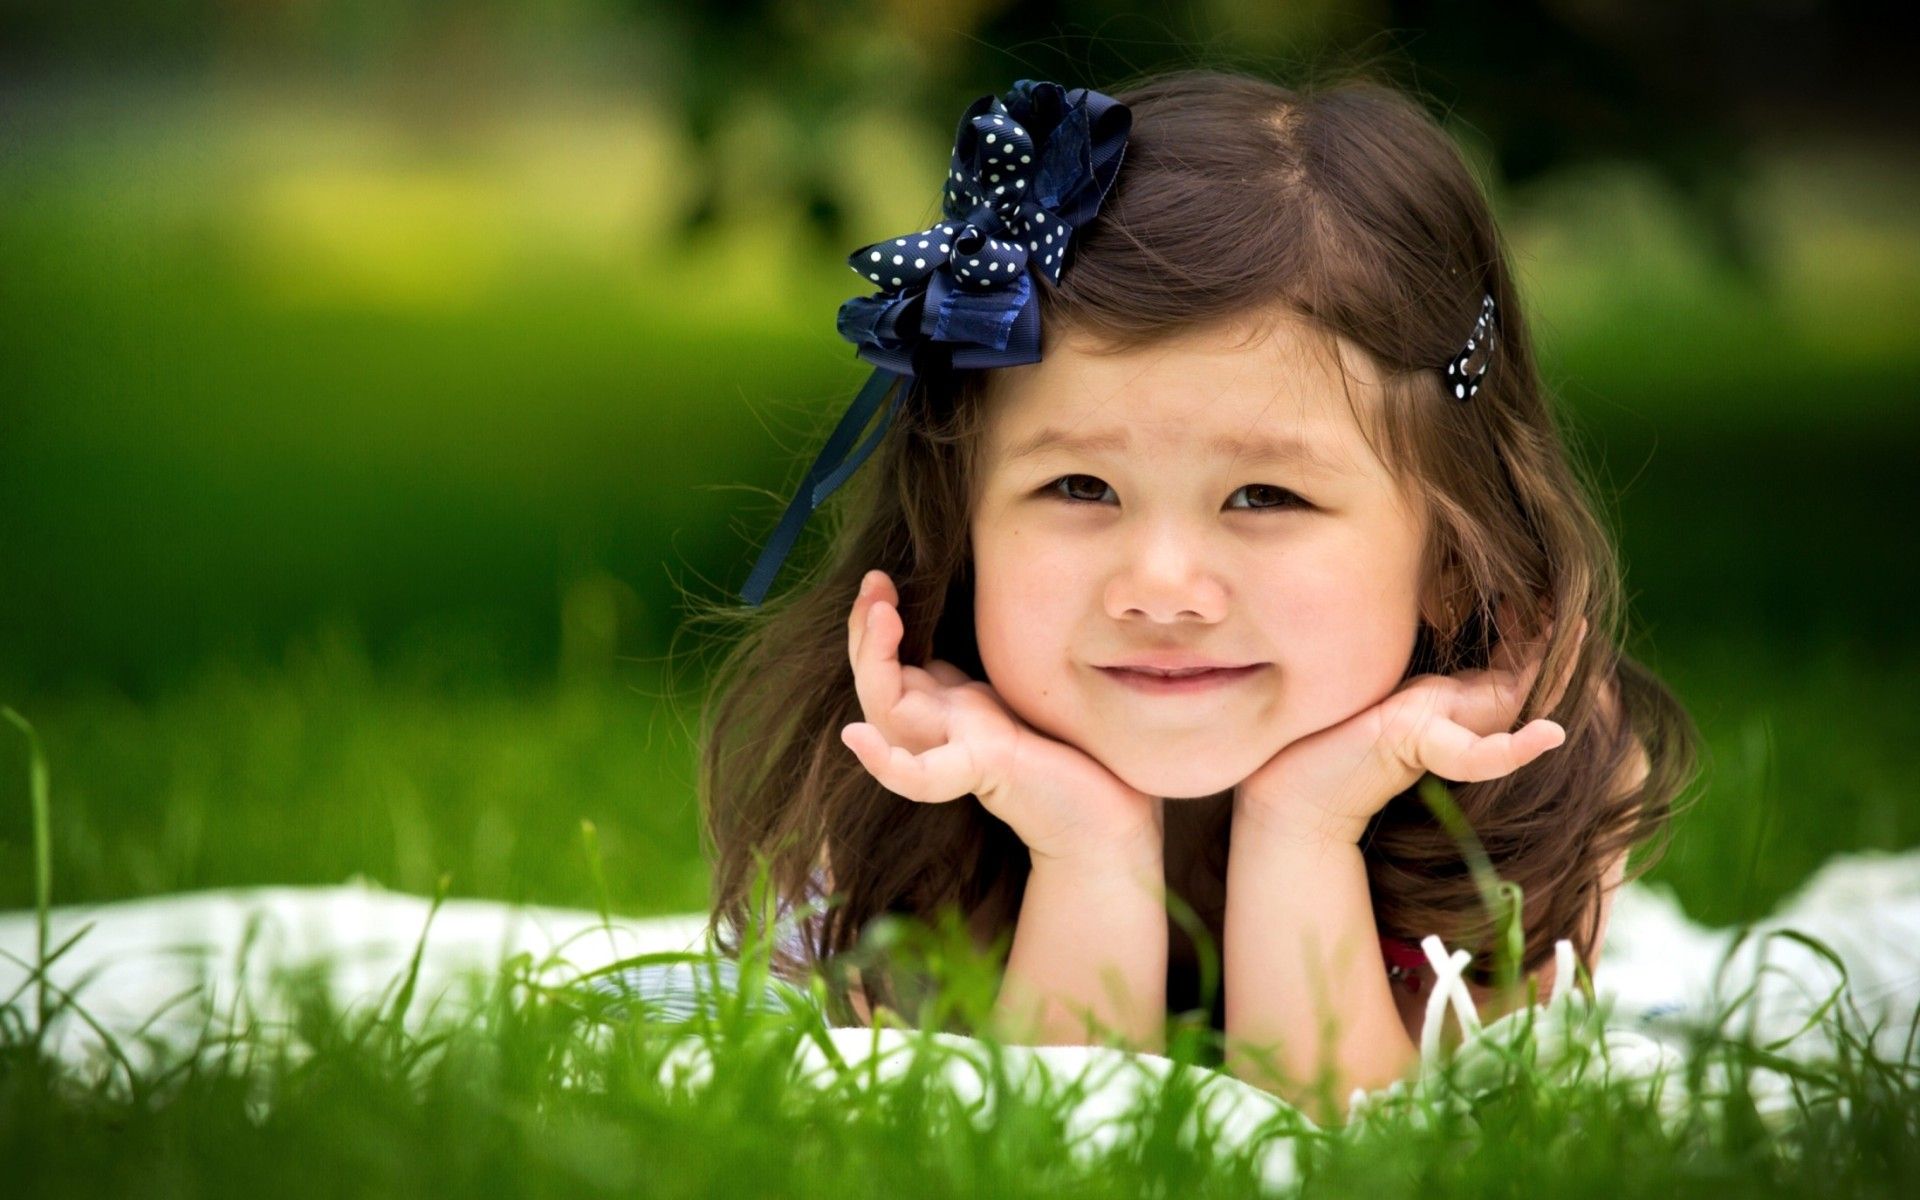 Awesome Cute Indian Babies HD Wallpaper. High Definition Wallpaper